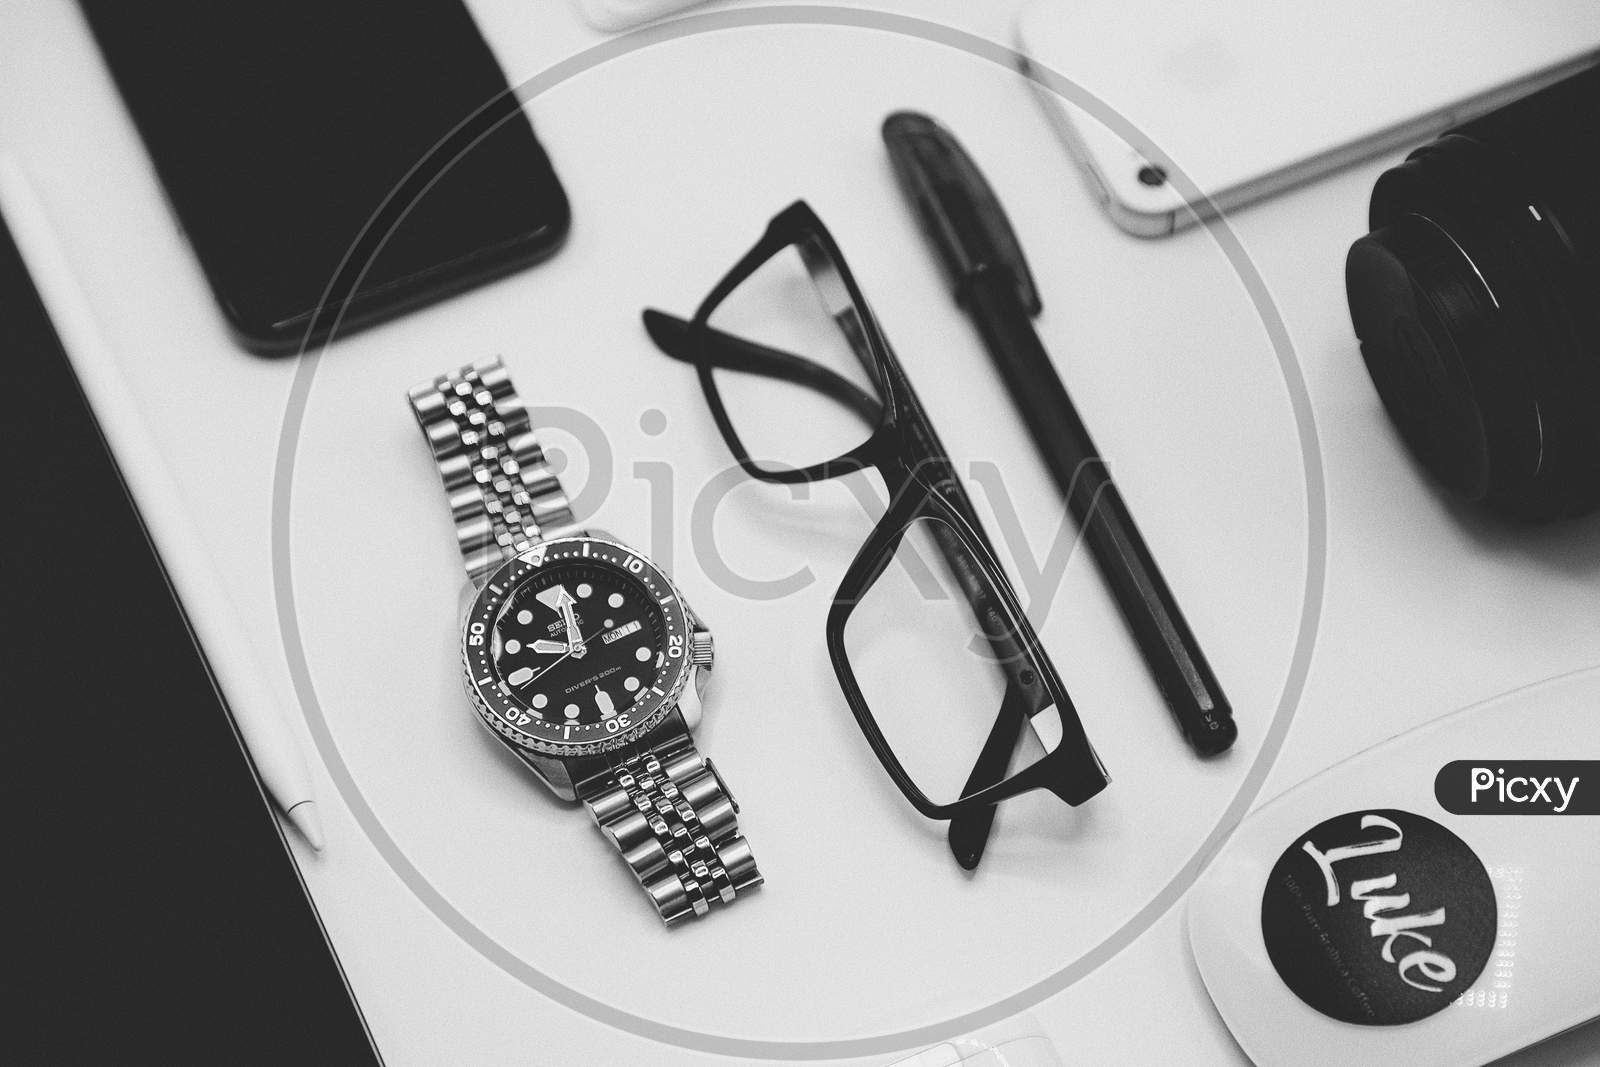 modern photography equipment over white table background